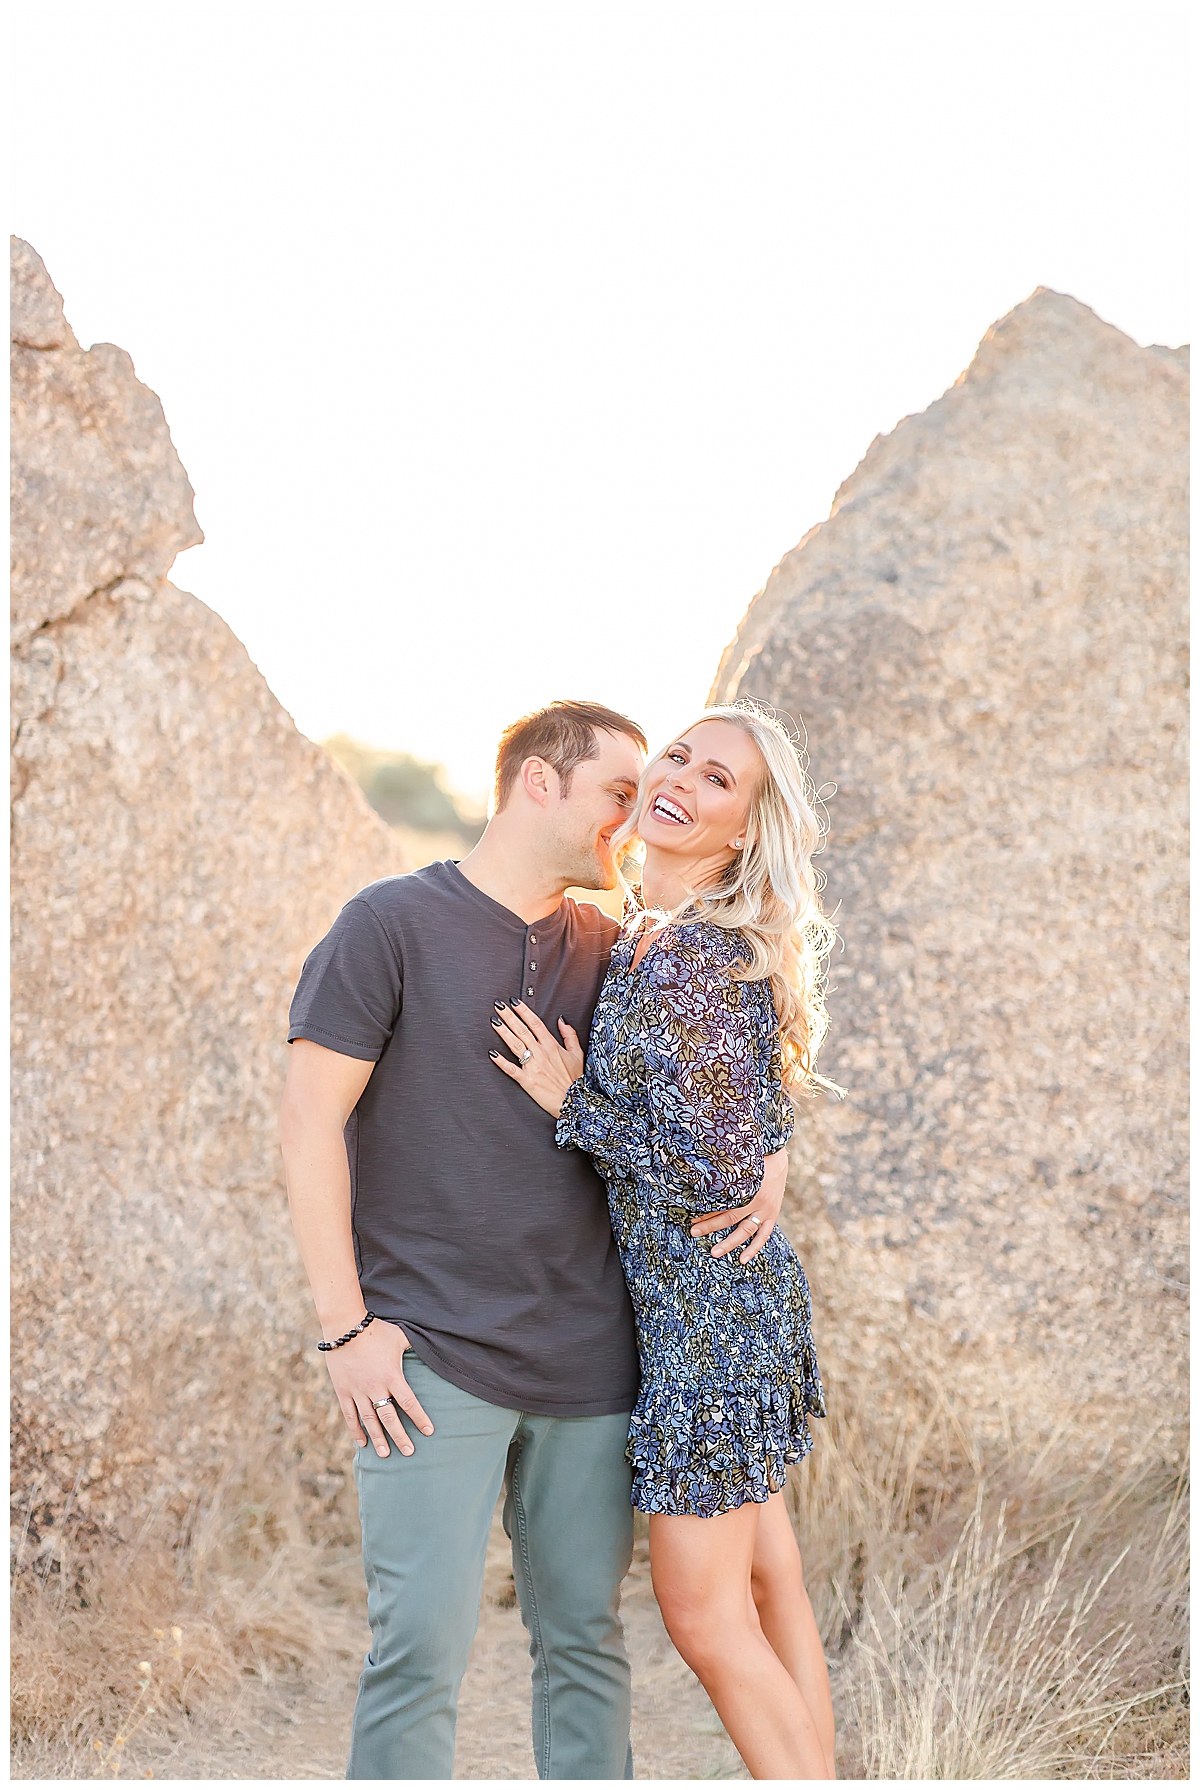 Couple kissing in the desert in Scottsdale, AZ photographed by Christine Deaton Creative